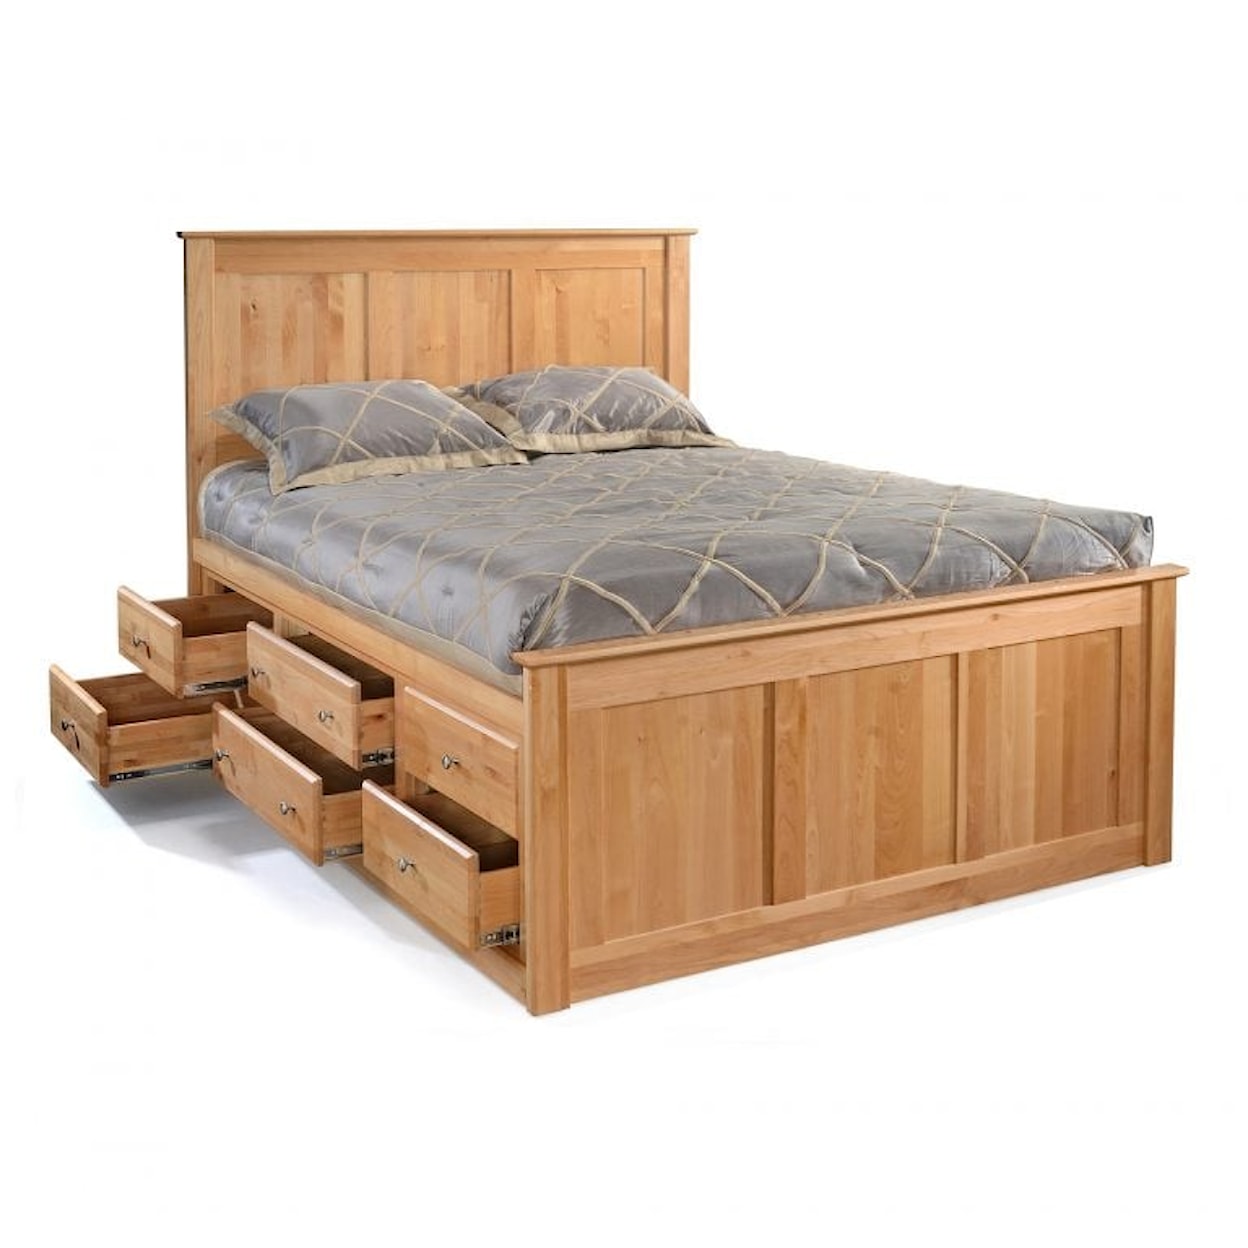 Archbold Furniture Chest Bed Cal. King 9-Drawer Chest Bed